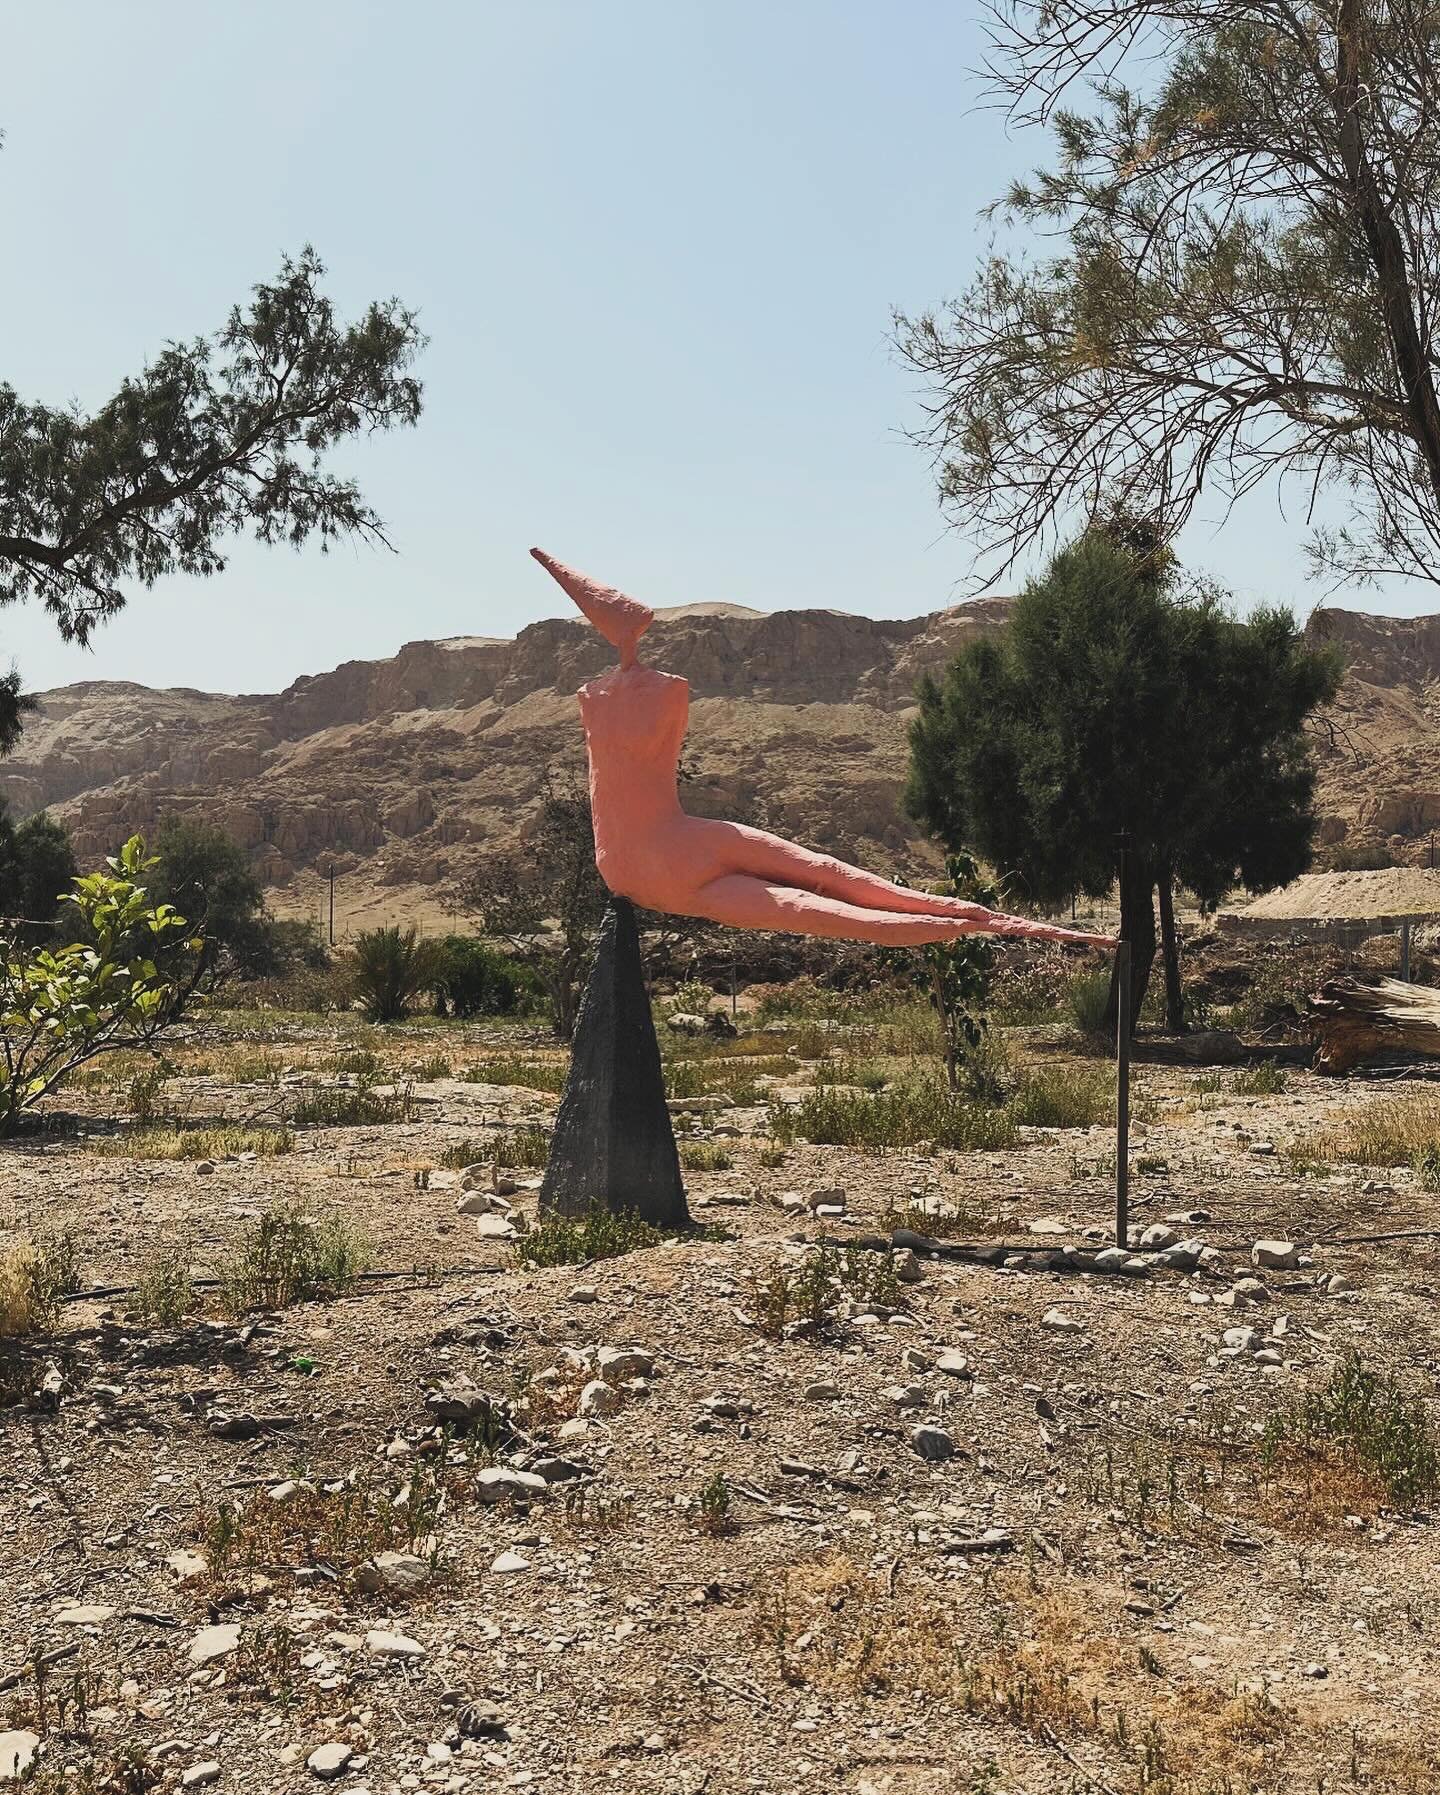 This is a sculpture garden created by Yoel Ziv, an artist who lives in a kibbutz Kalya by the Dead Sea.

Yoel works with metal. He doesn&rsquo;t sketch before he starts, he just starts.
Every dent, rivet, bend in the artwork - you can feel his very s